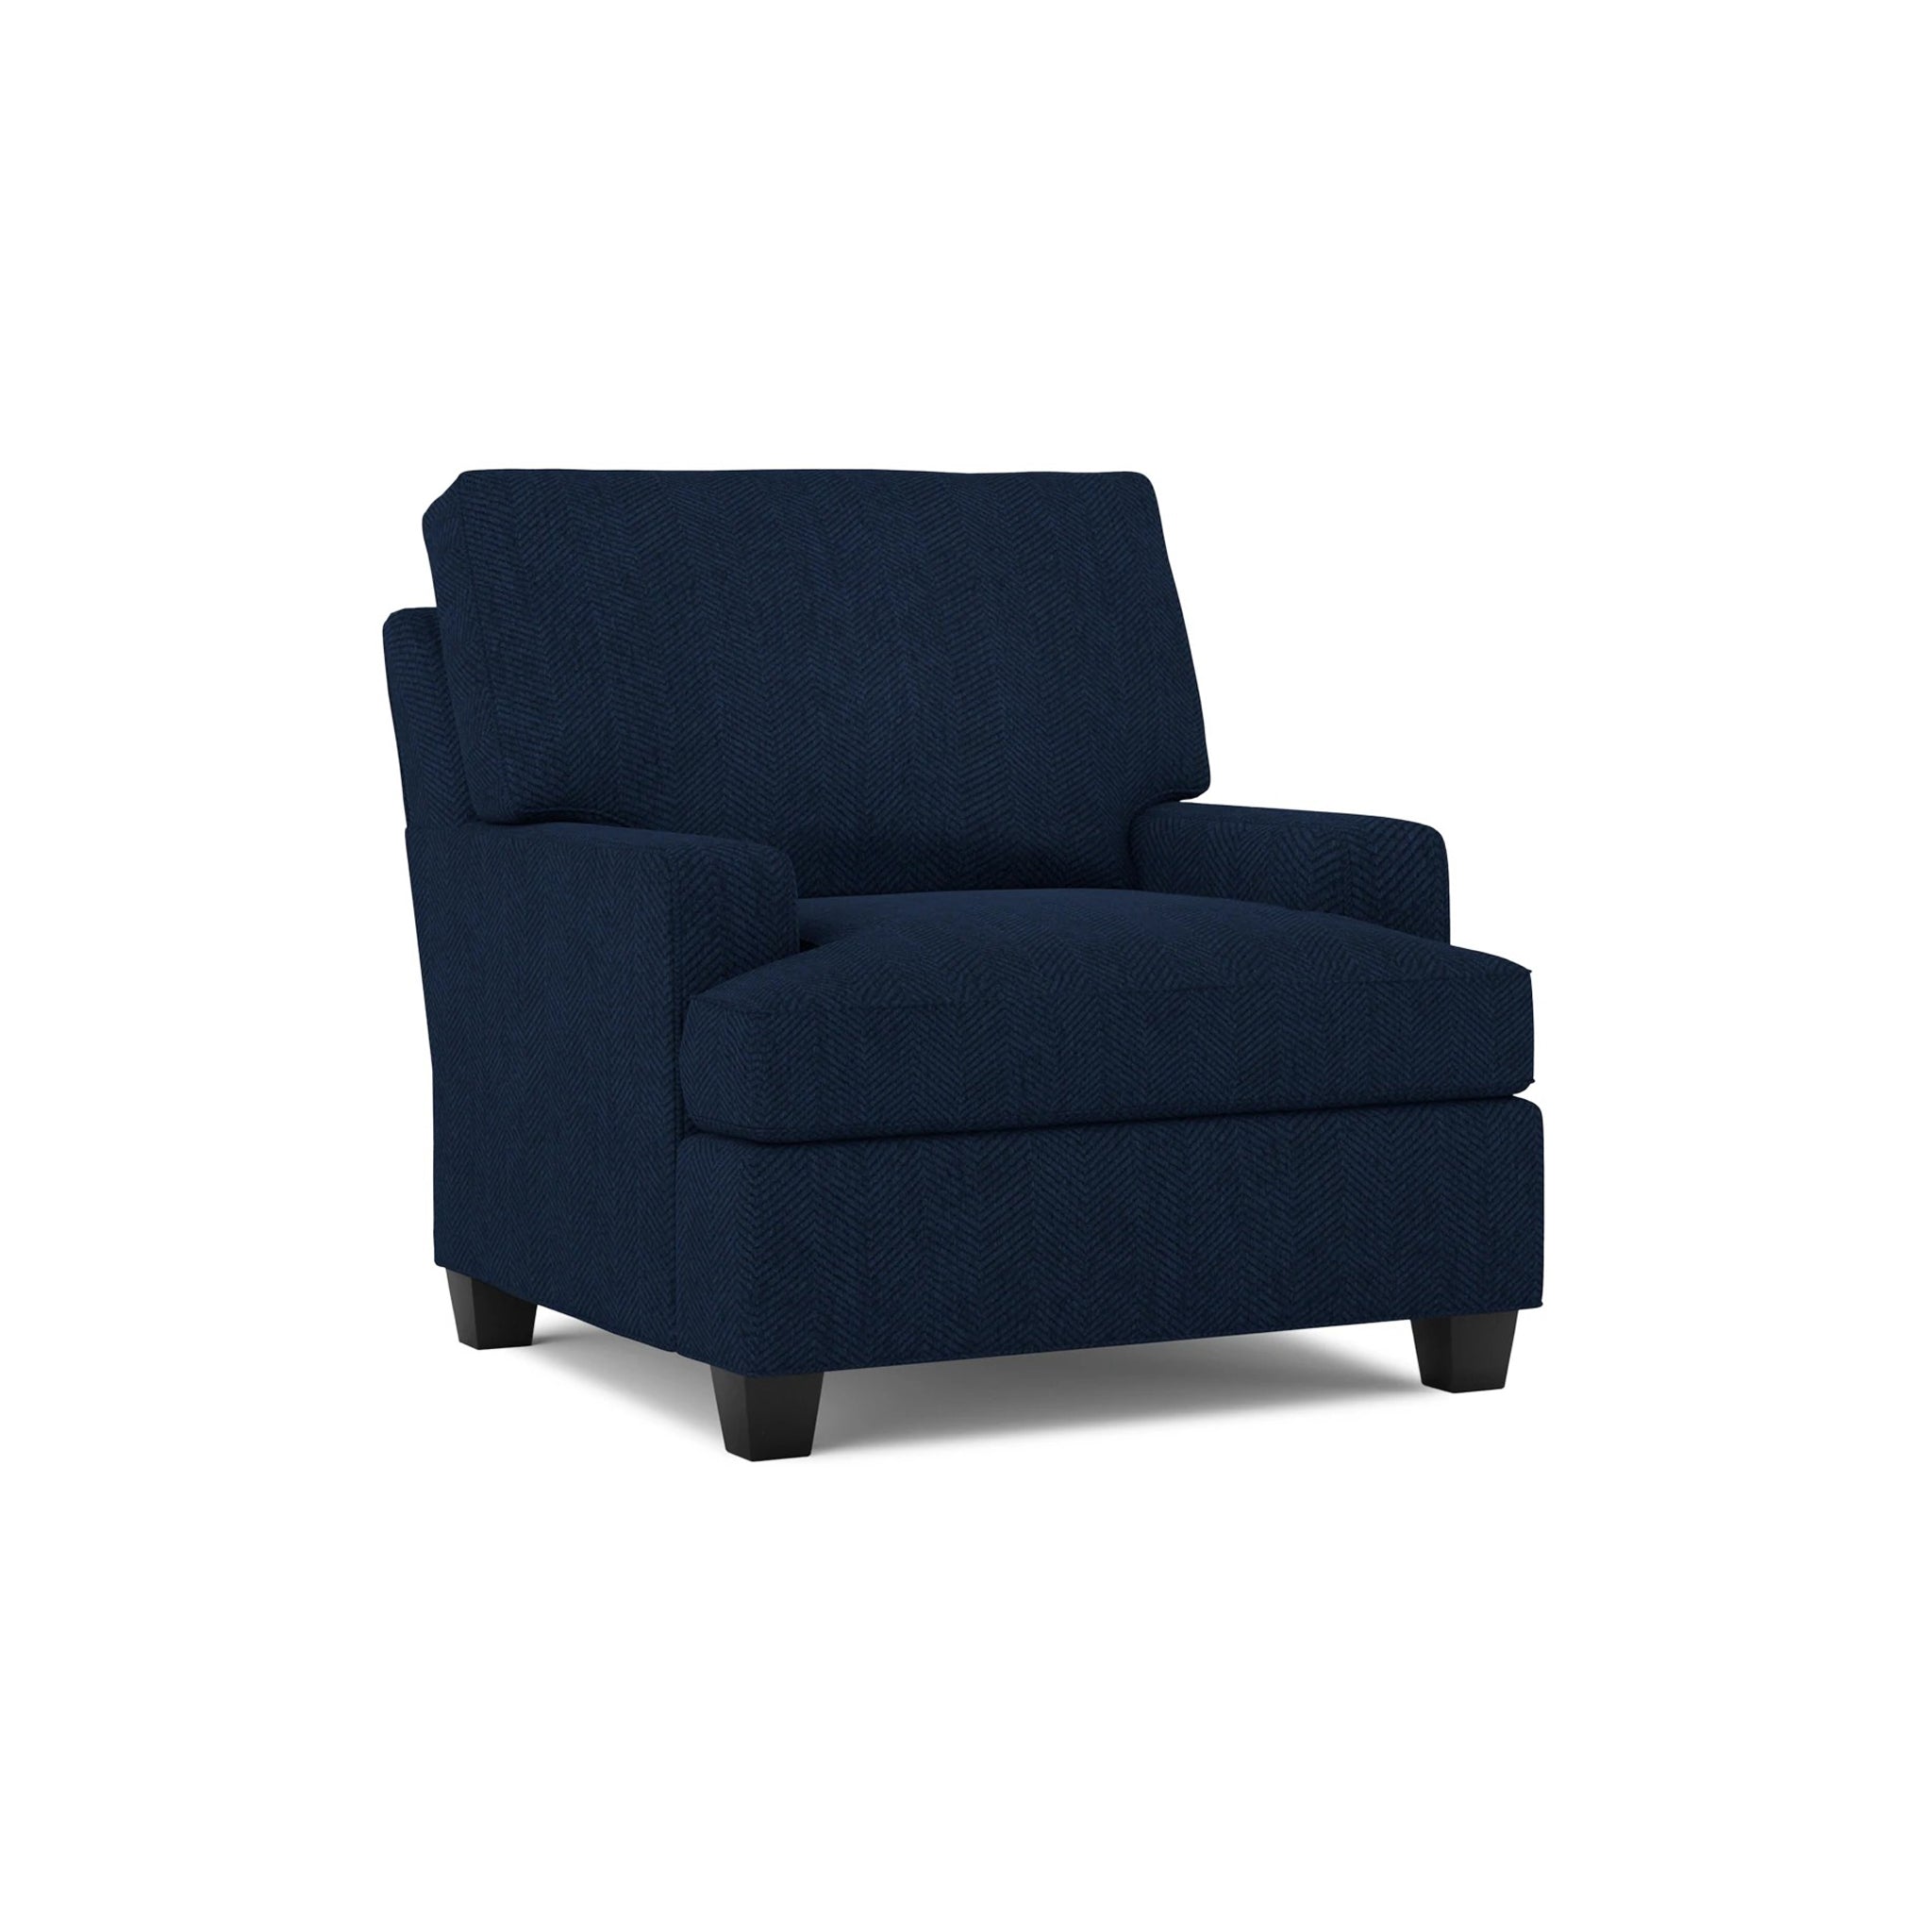 The Crag House Collection - Arm Chair